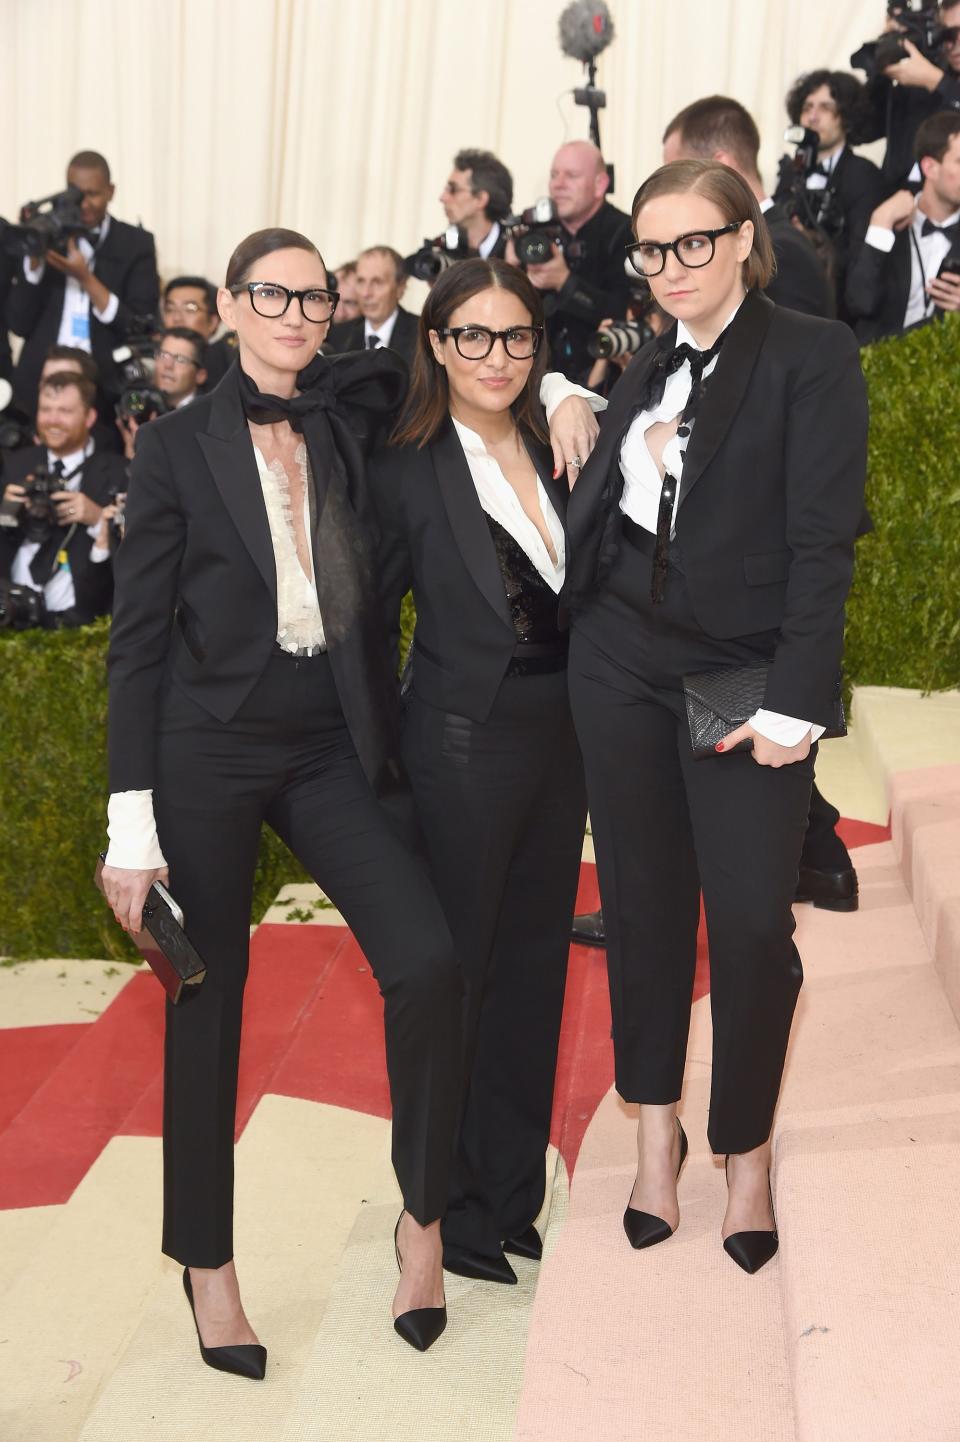 <h1 class="title">Jenna Lyons in J.Crew and an Edie Parker bag, Jennifer Konner in J.Crew, and Lena Dunham in J.Crew</h1><cite class="credit">Photo: Getty Images</cite>